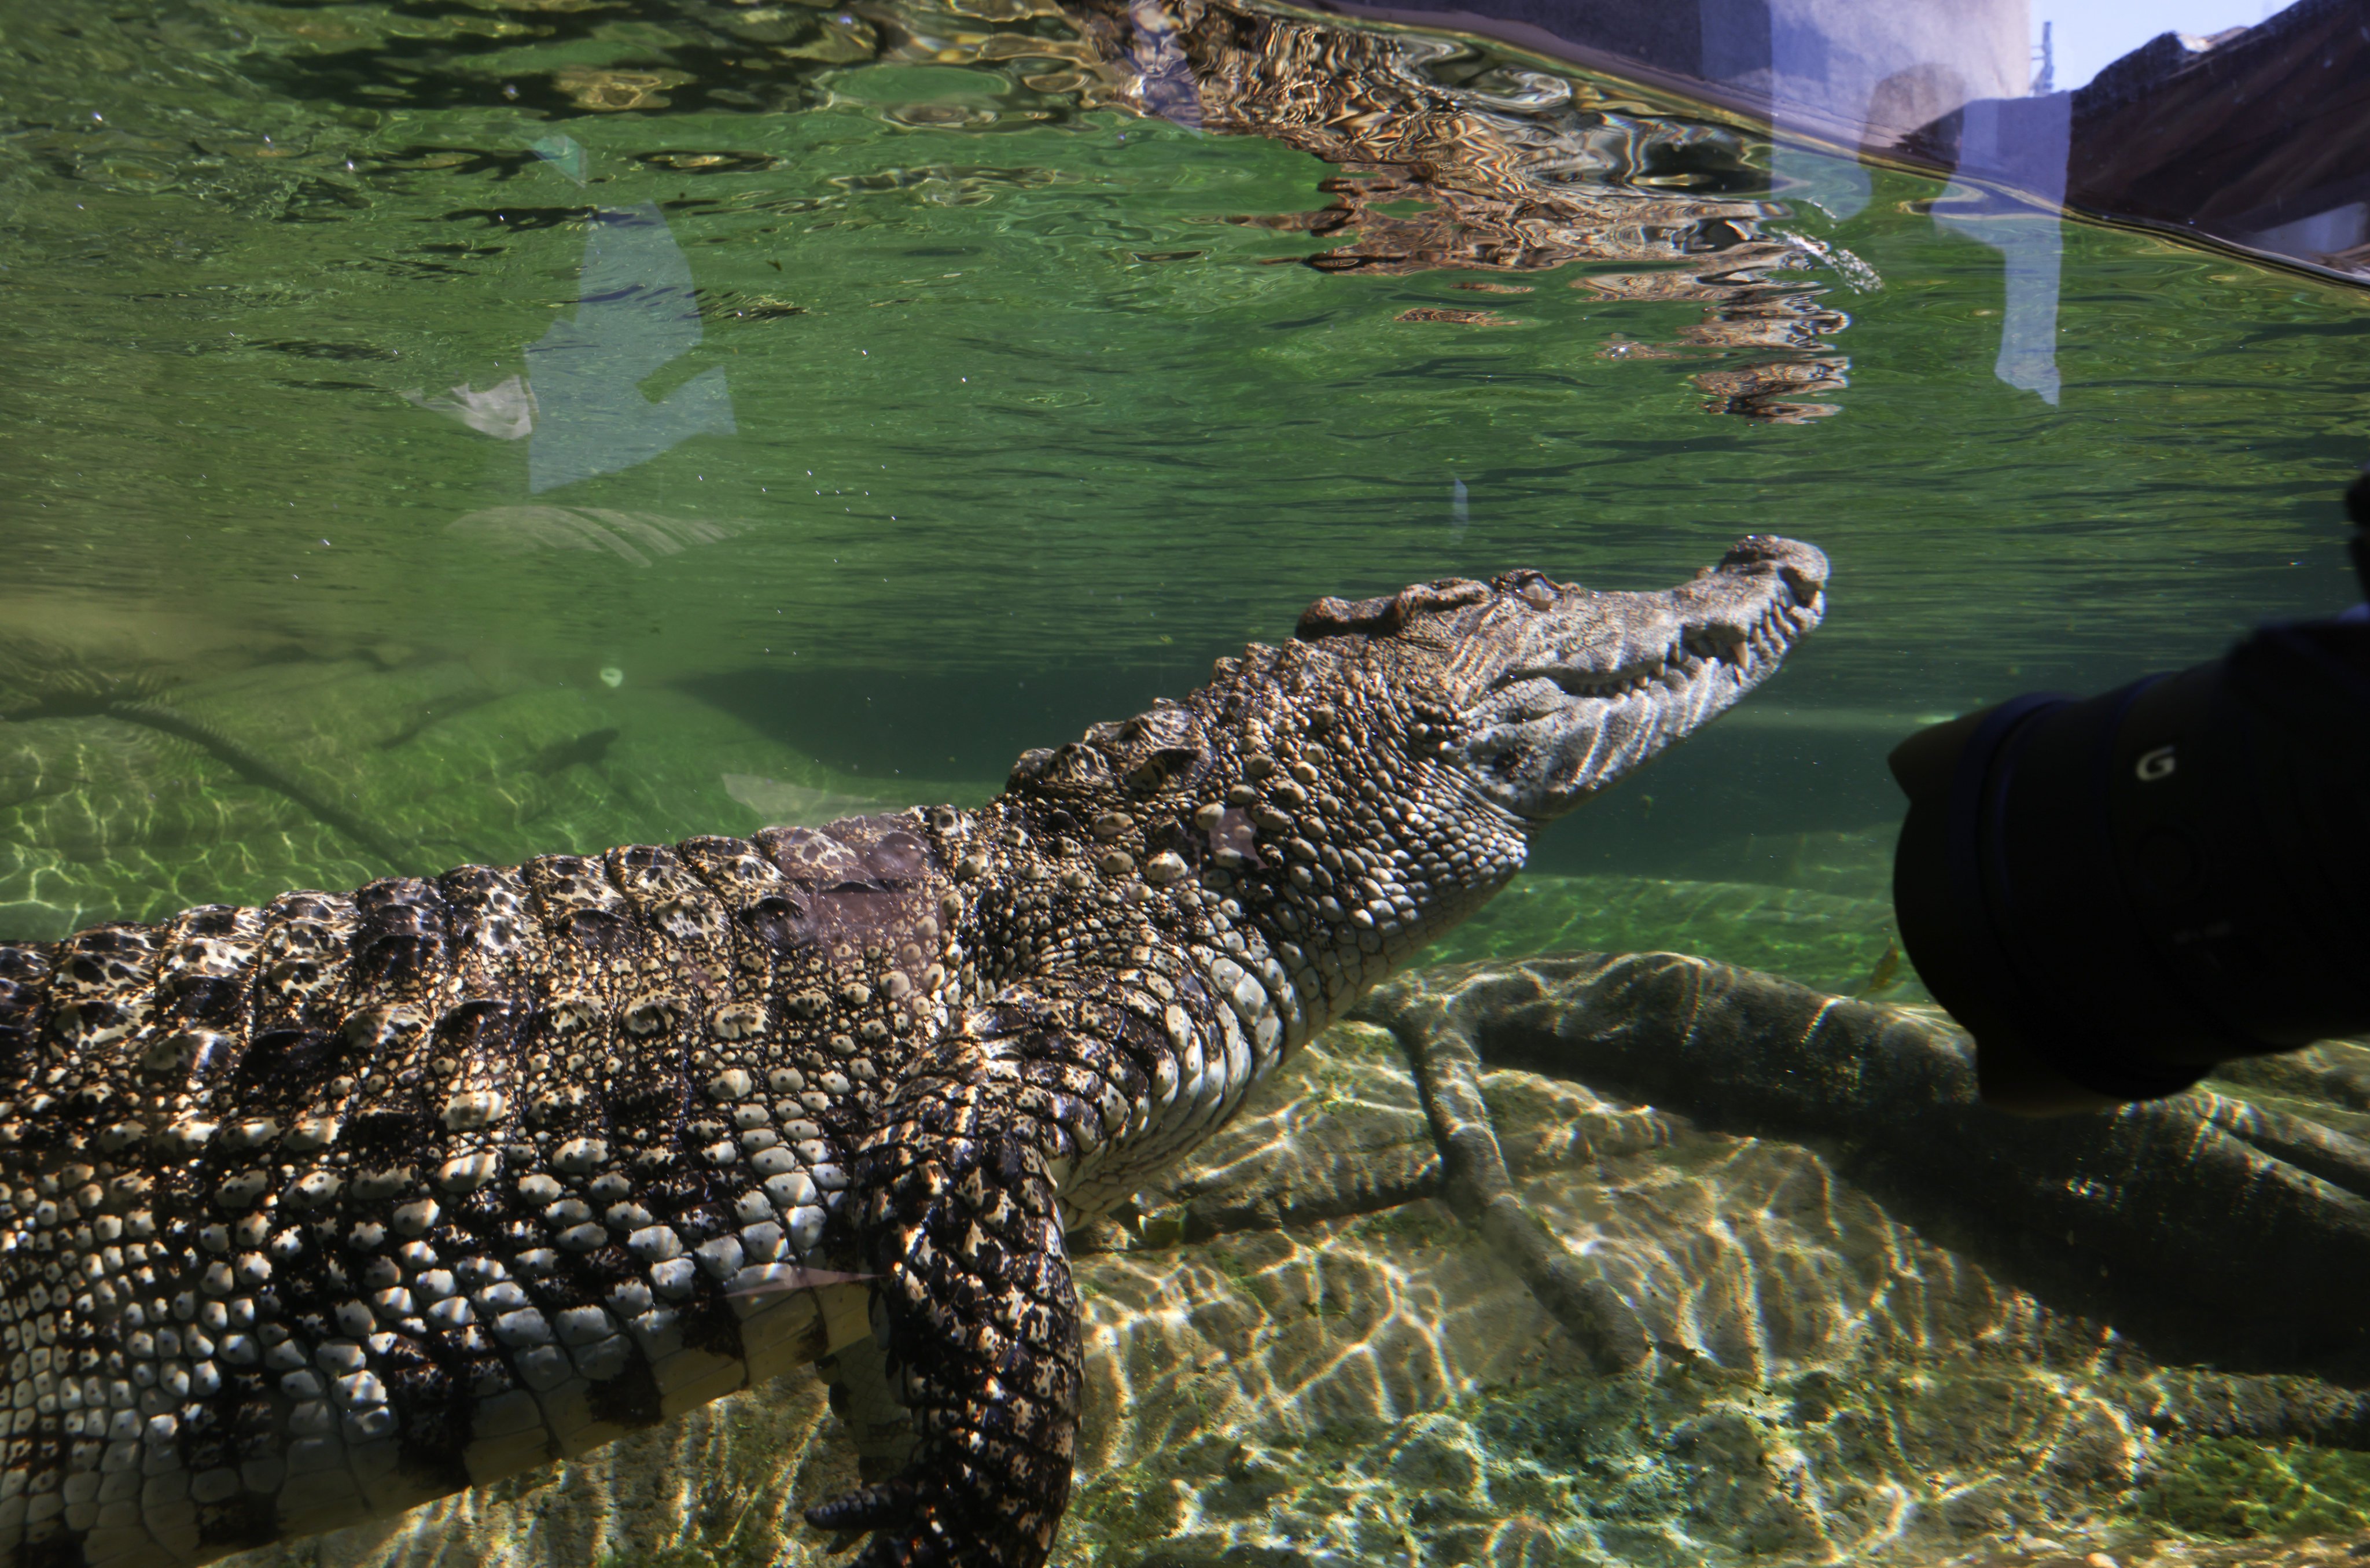 Passion goes for a dip at Ocean Park. More than 11,000 people voted to choose the reptile’s name. Photo: Yik Yeung-man